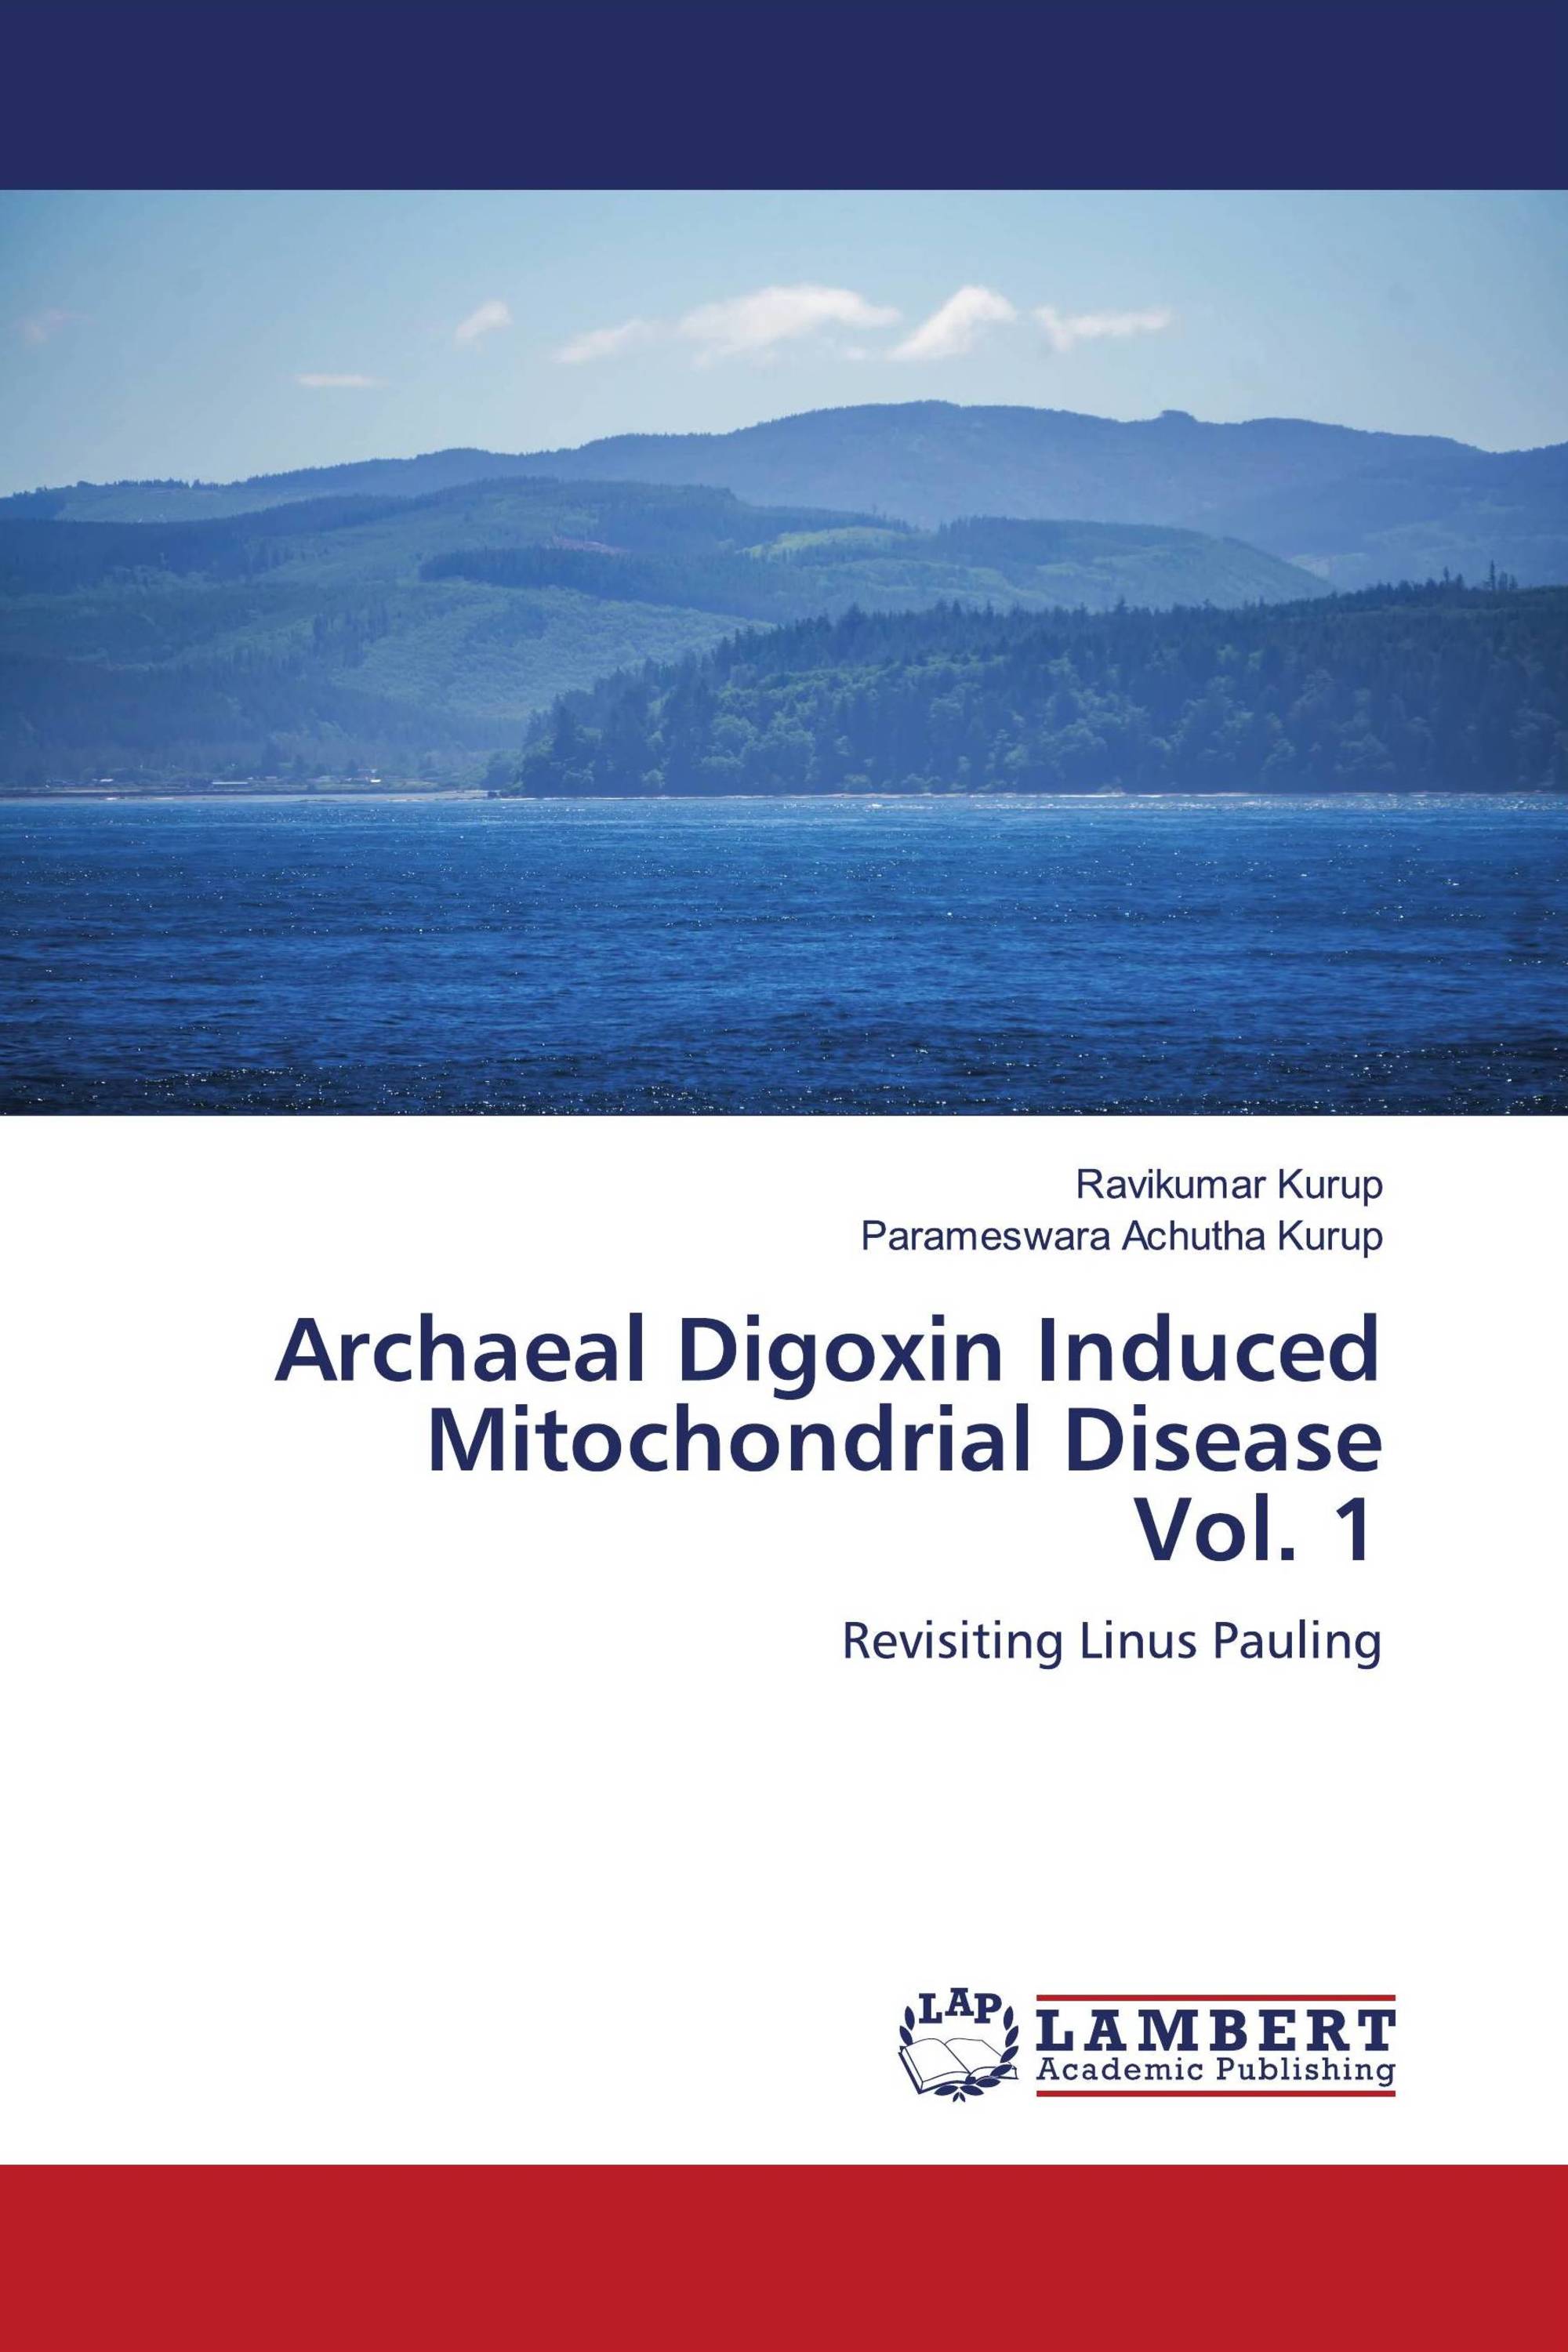 Archaeal Digoxin Induced Mitochondrial Disease Vol. 1